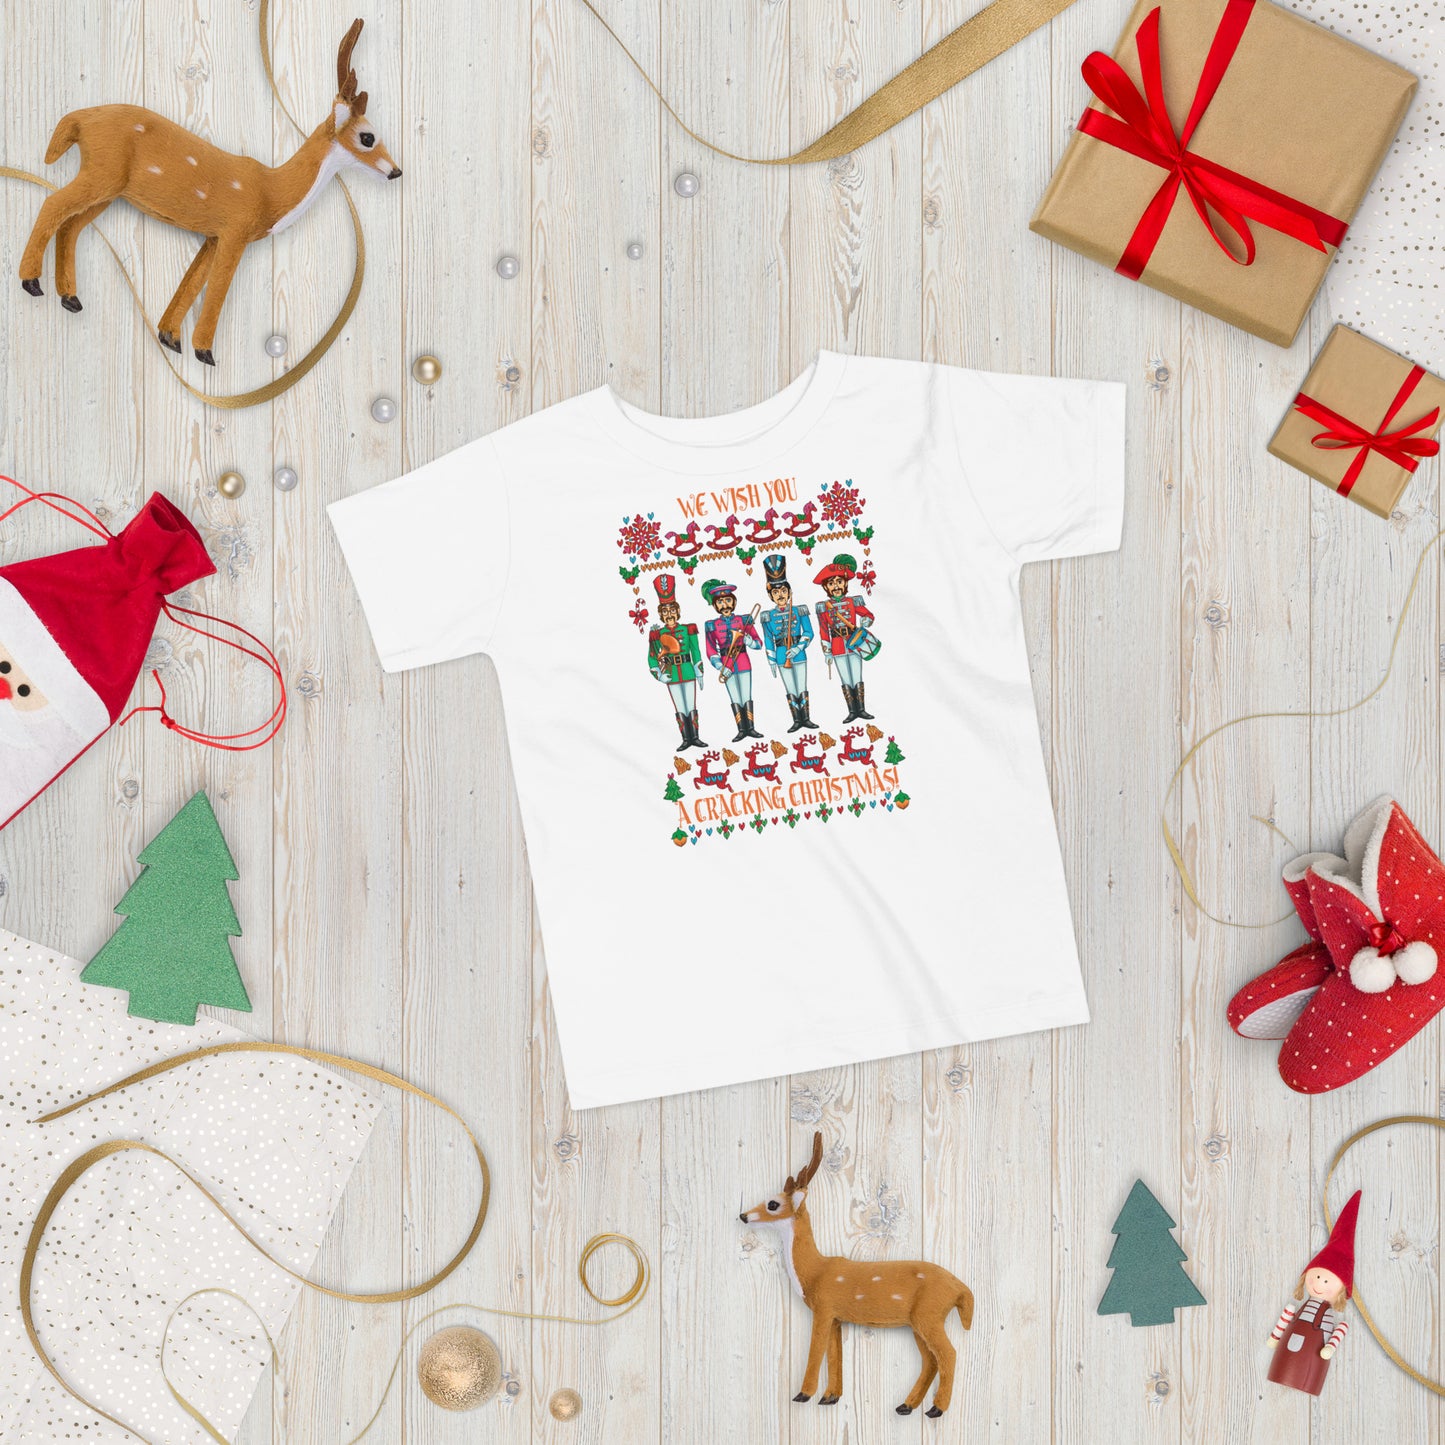 A CRACKING CHRISTMAS WITH THE BEATLES Kids T-Shirt